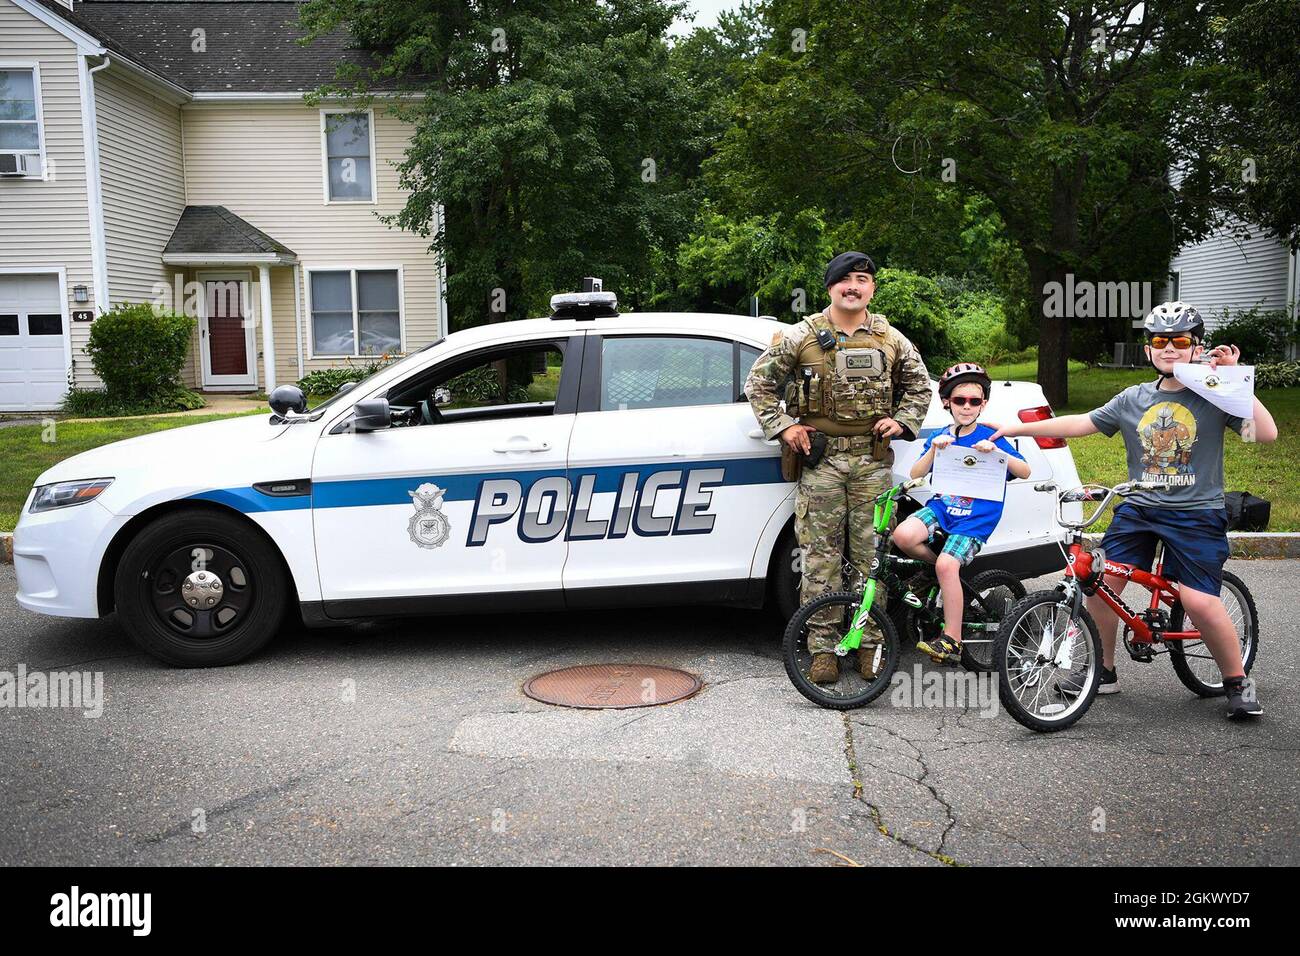 Senior Airman Carlos Howard, 66th Security Forces Squadron Positive Policing program lead, stands with Parker and Douglas Jones, Hanscom residents, after recognizing them with Blue Bucks for wearing proper safety gear while riding bikes at Hanscom Air Force Base, Mass., July 13. Blue Bucks are coupons to either a number of base restaurants, or Outdoor Recreation rentals. Stock Photo